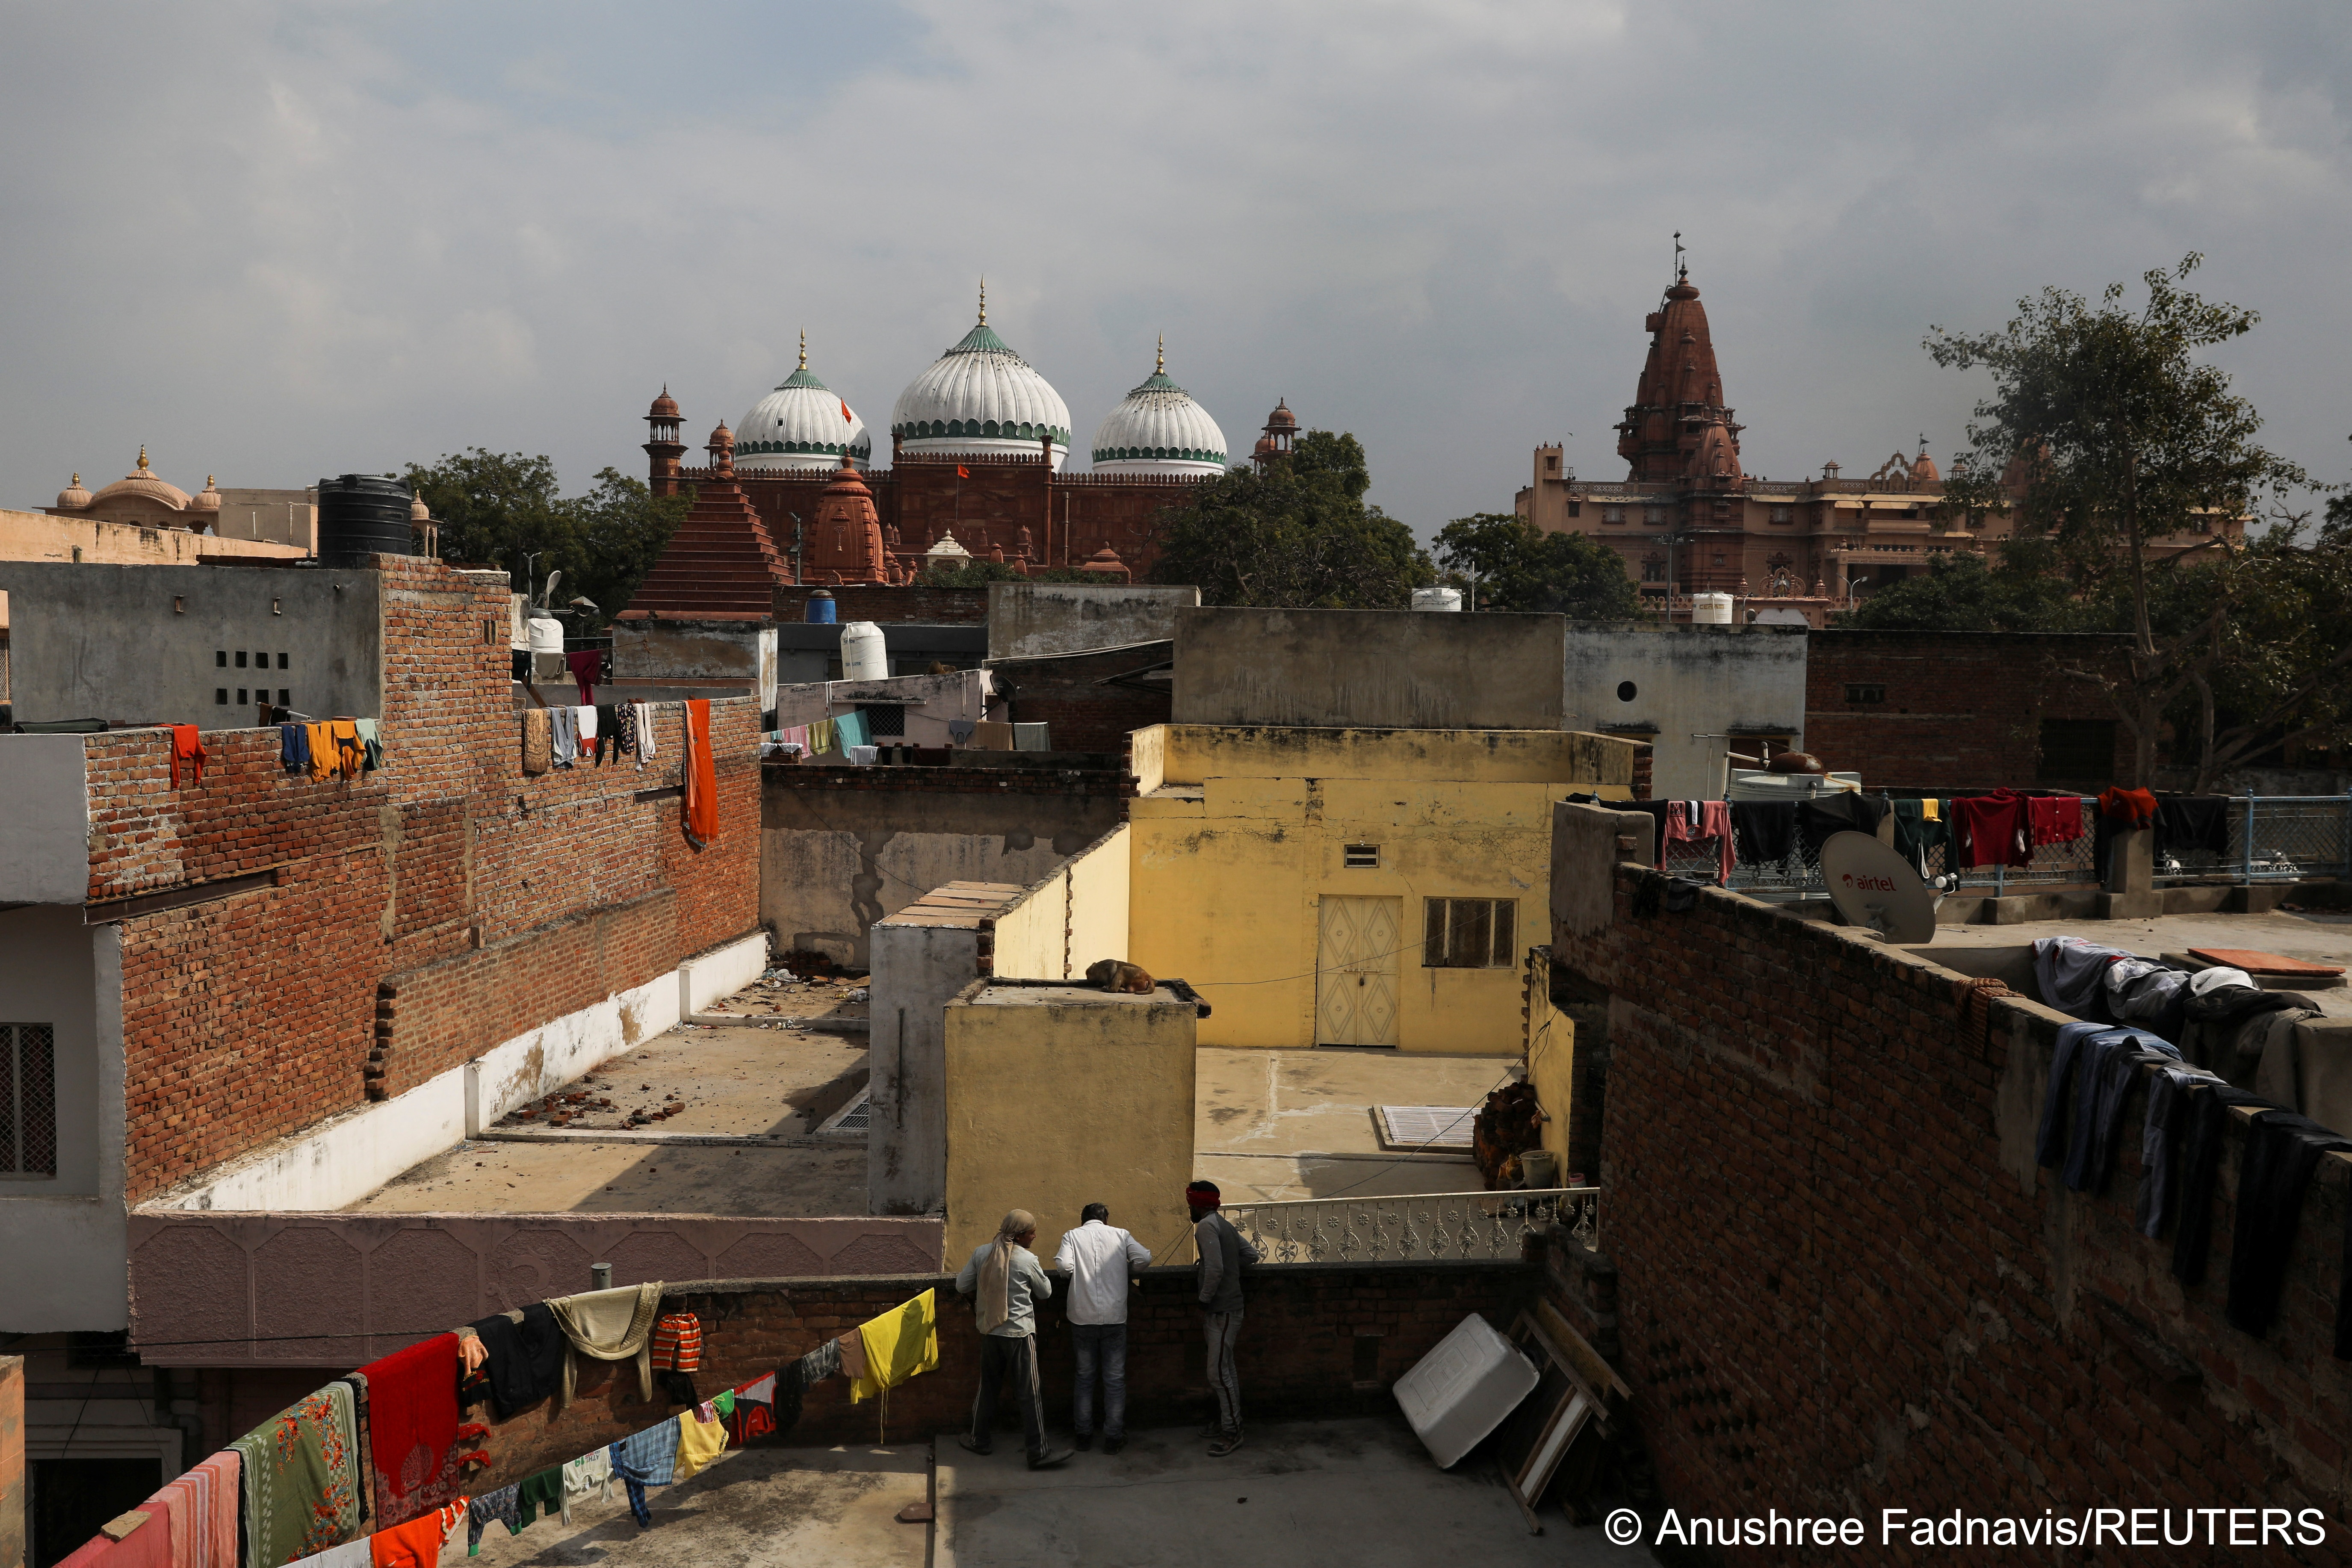 Shahi Eidgah mosque and the Hindu temple are seen side-by-side in Mathura town, in the northern state of Uttar Pradesh, India, 24 January, 2022 (photo: Reuters/Anushree Fadnavi)